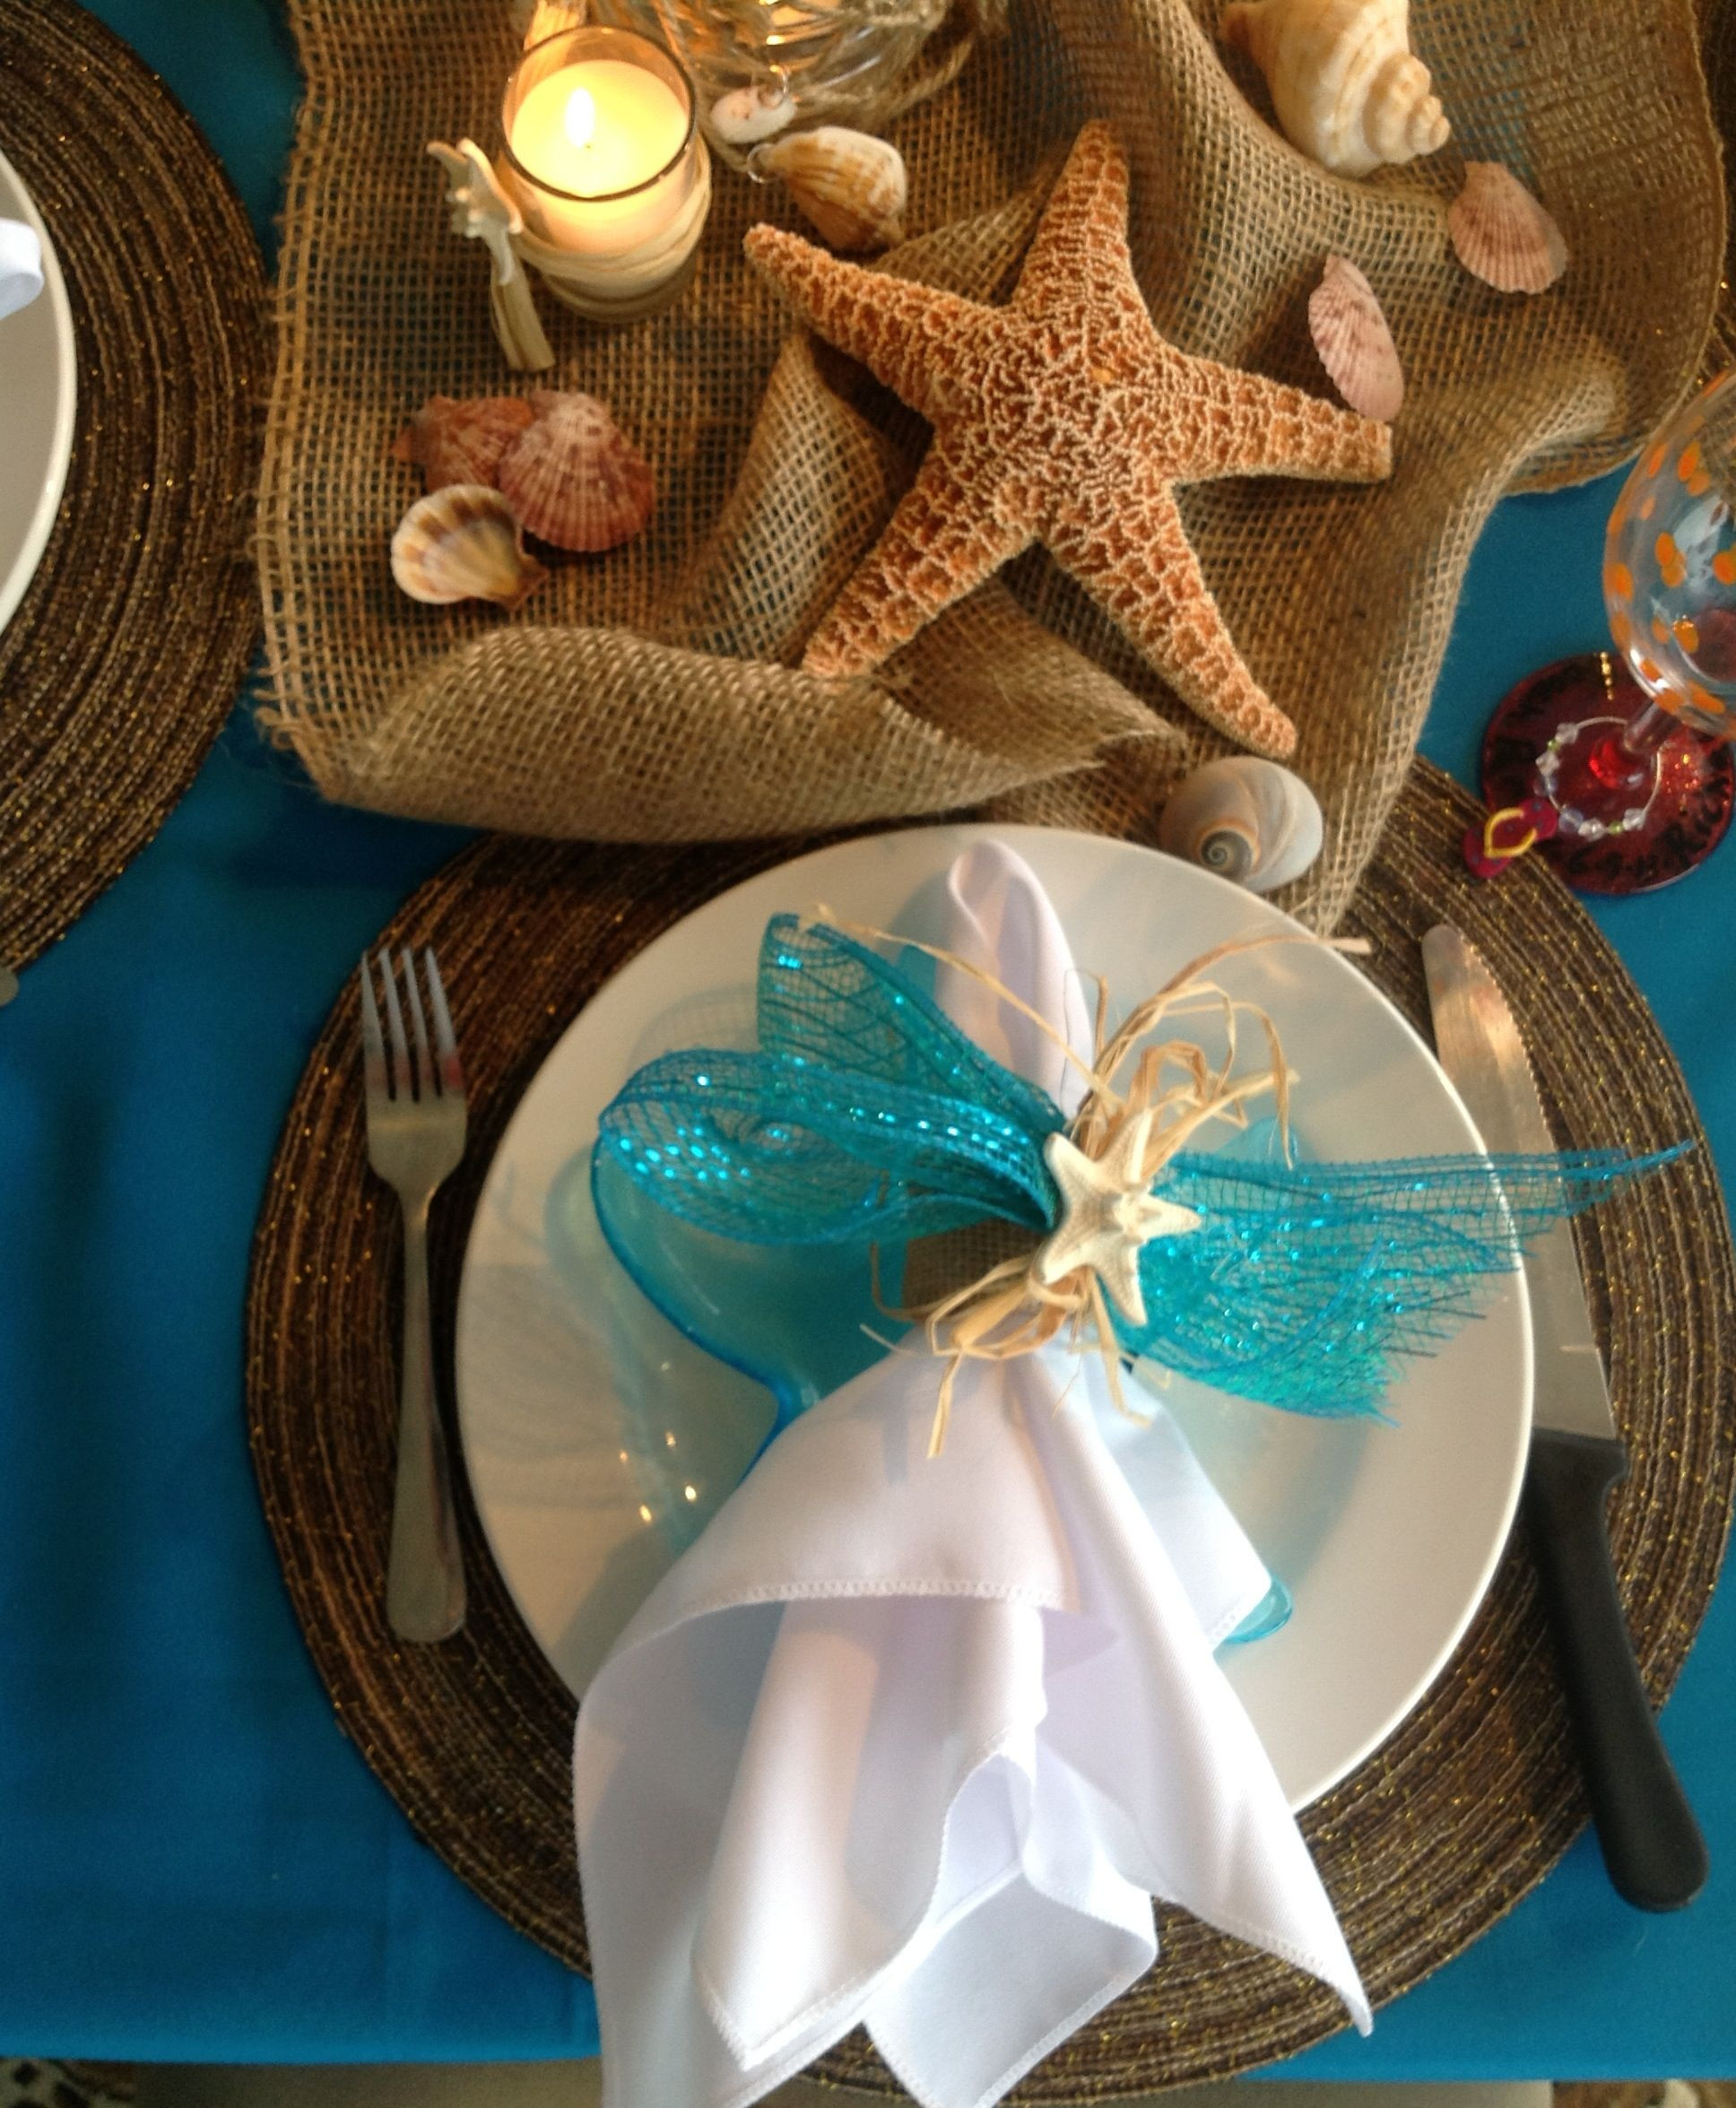 Beach Themed Retirement Party Ideas
 Retirement Beach Party Table